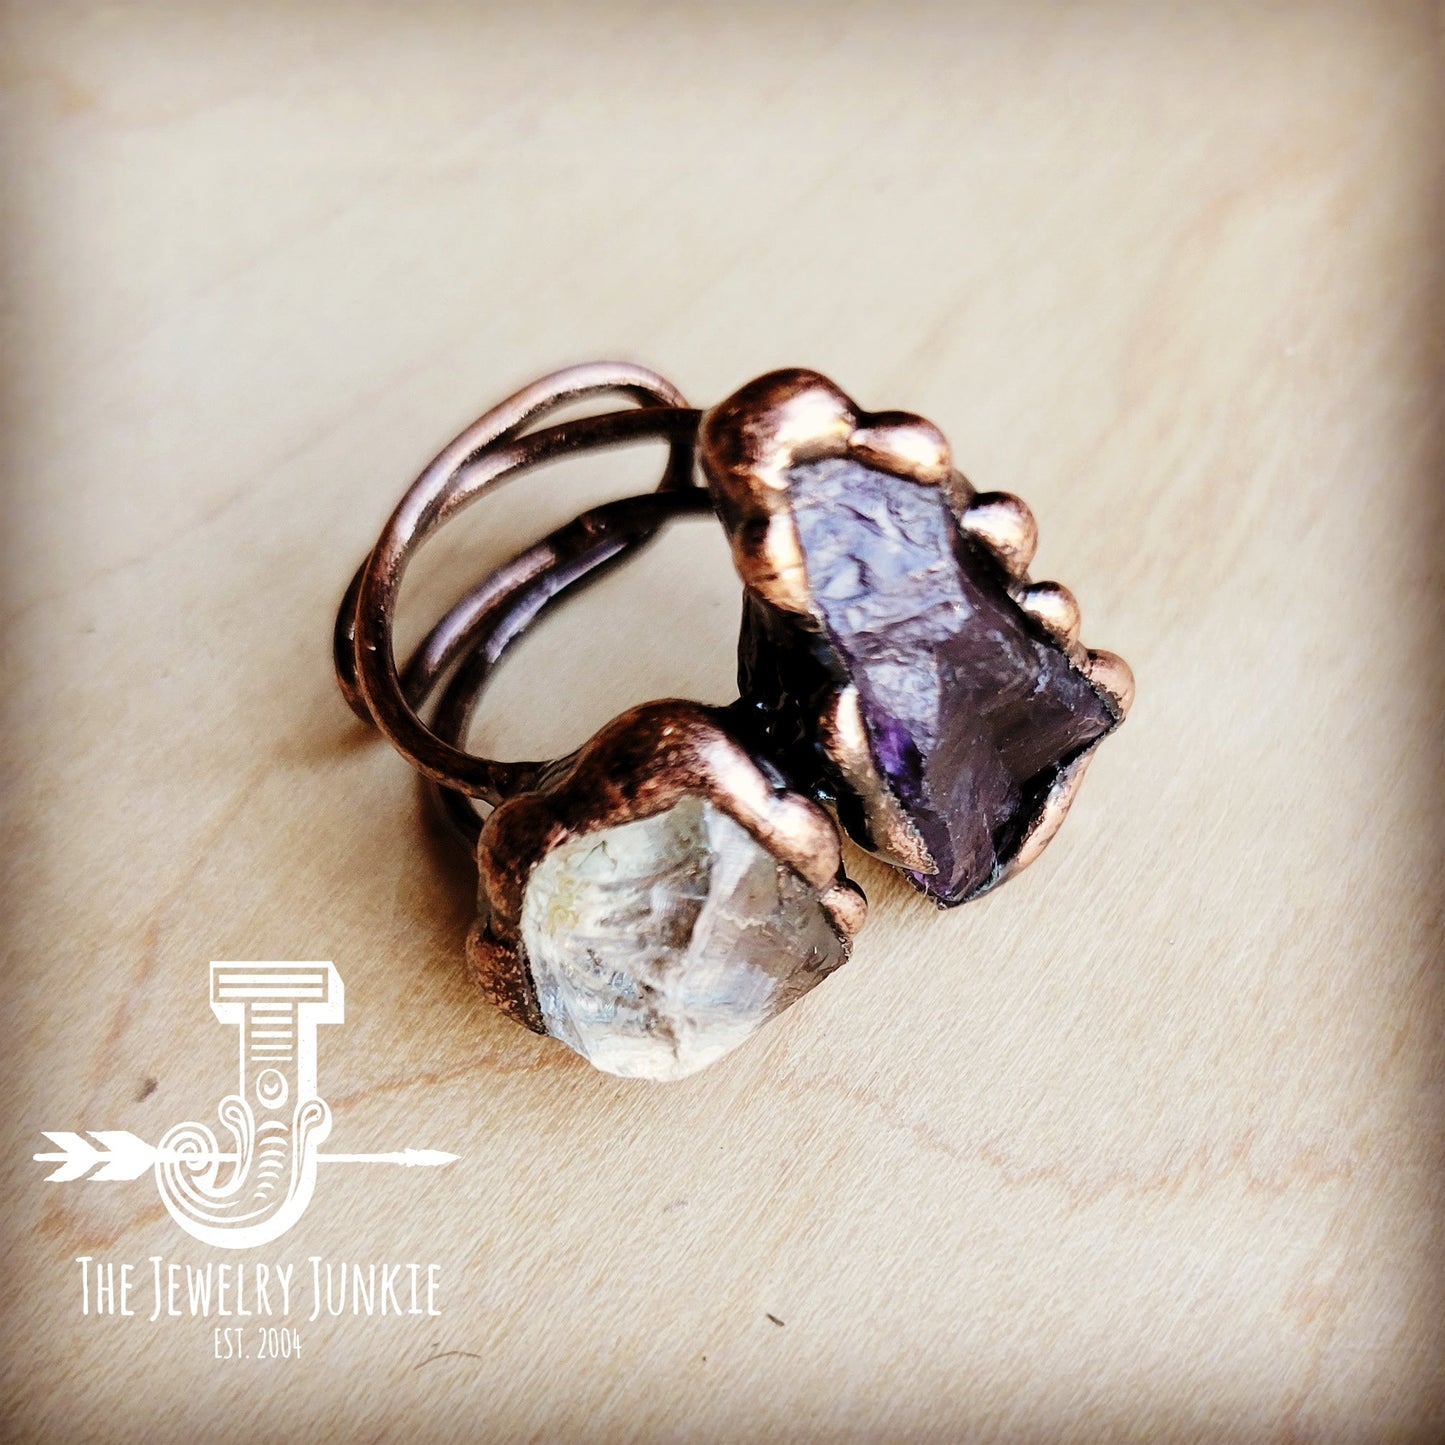 Genuine Amethyst and Quartz Ring in a Copper Setting 012a by The Jewelry Junkie